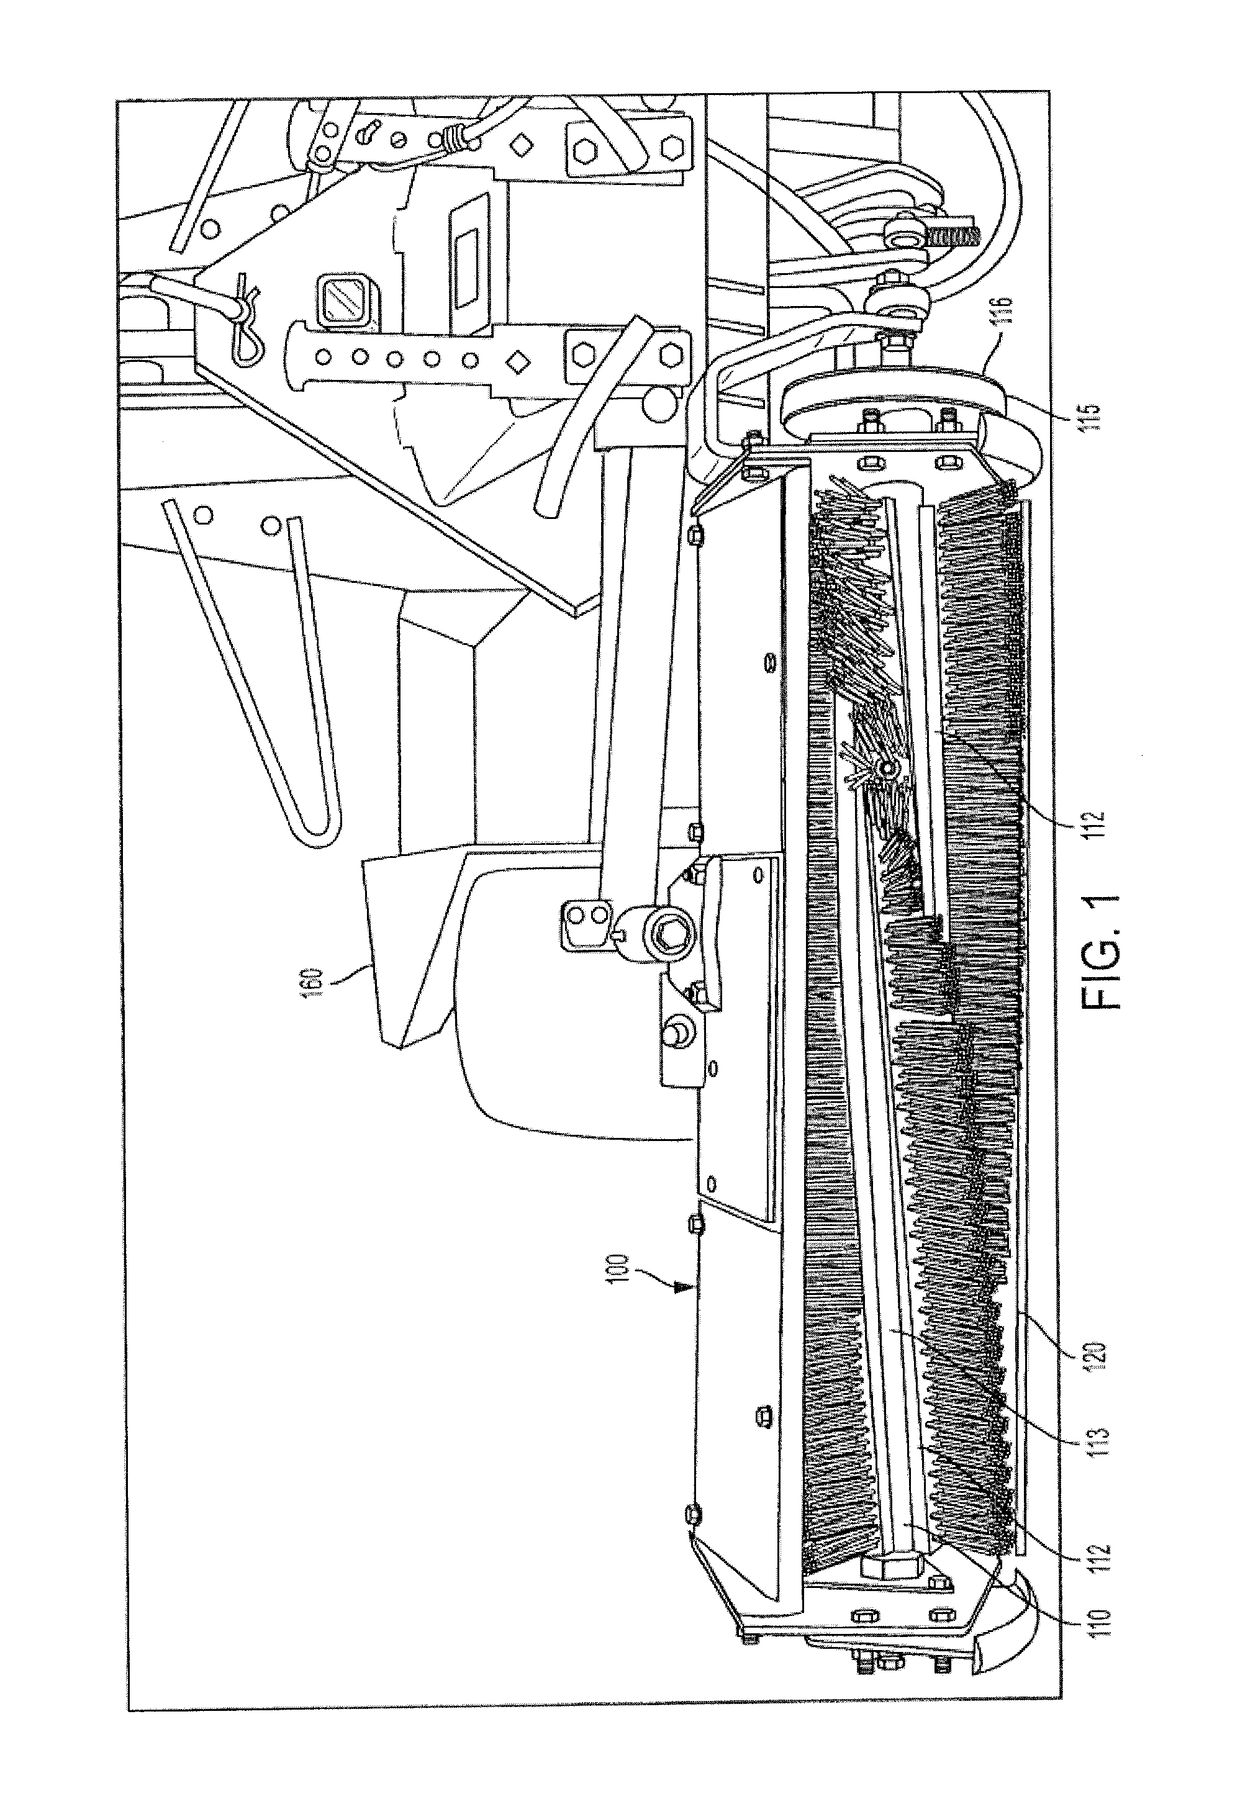 Apparatus, system and method for mechanical, selective plant removal in mature and establishing crops including turfgrasses